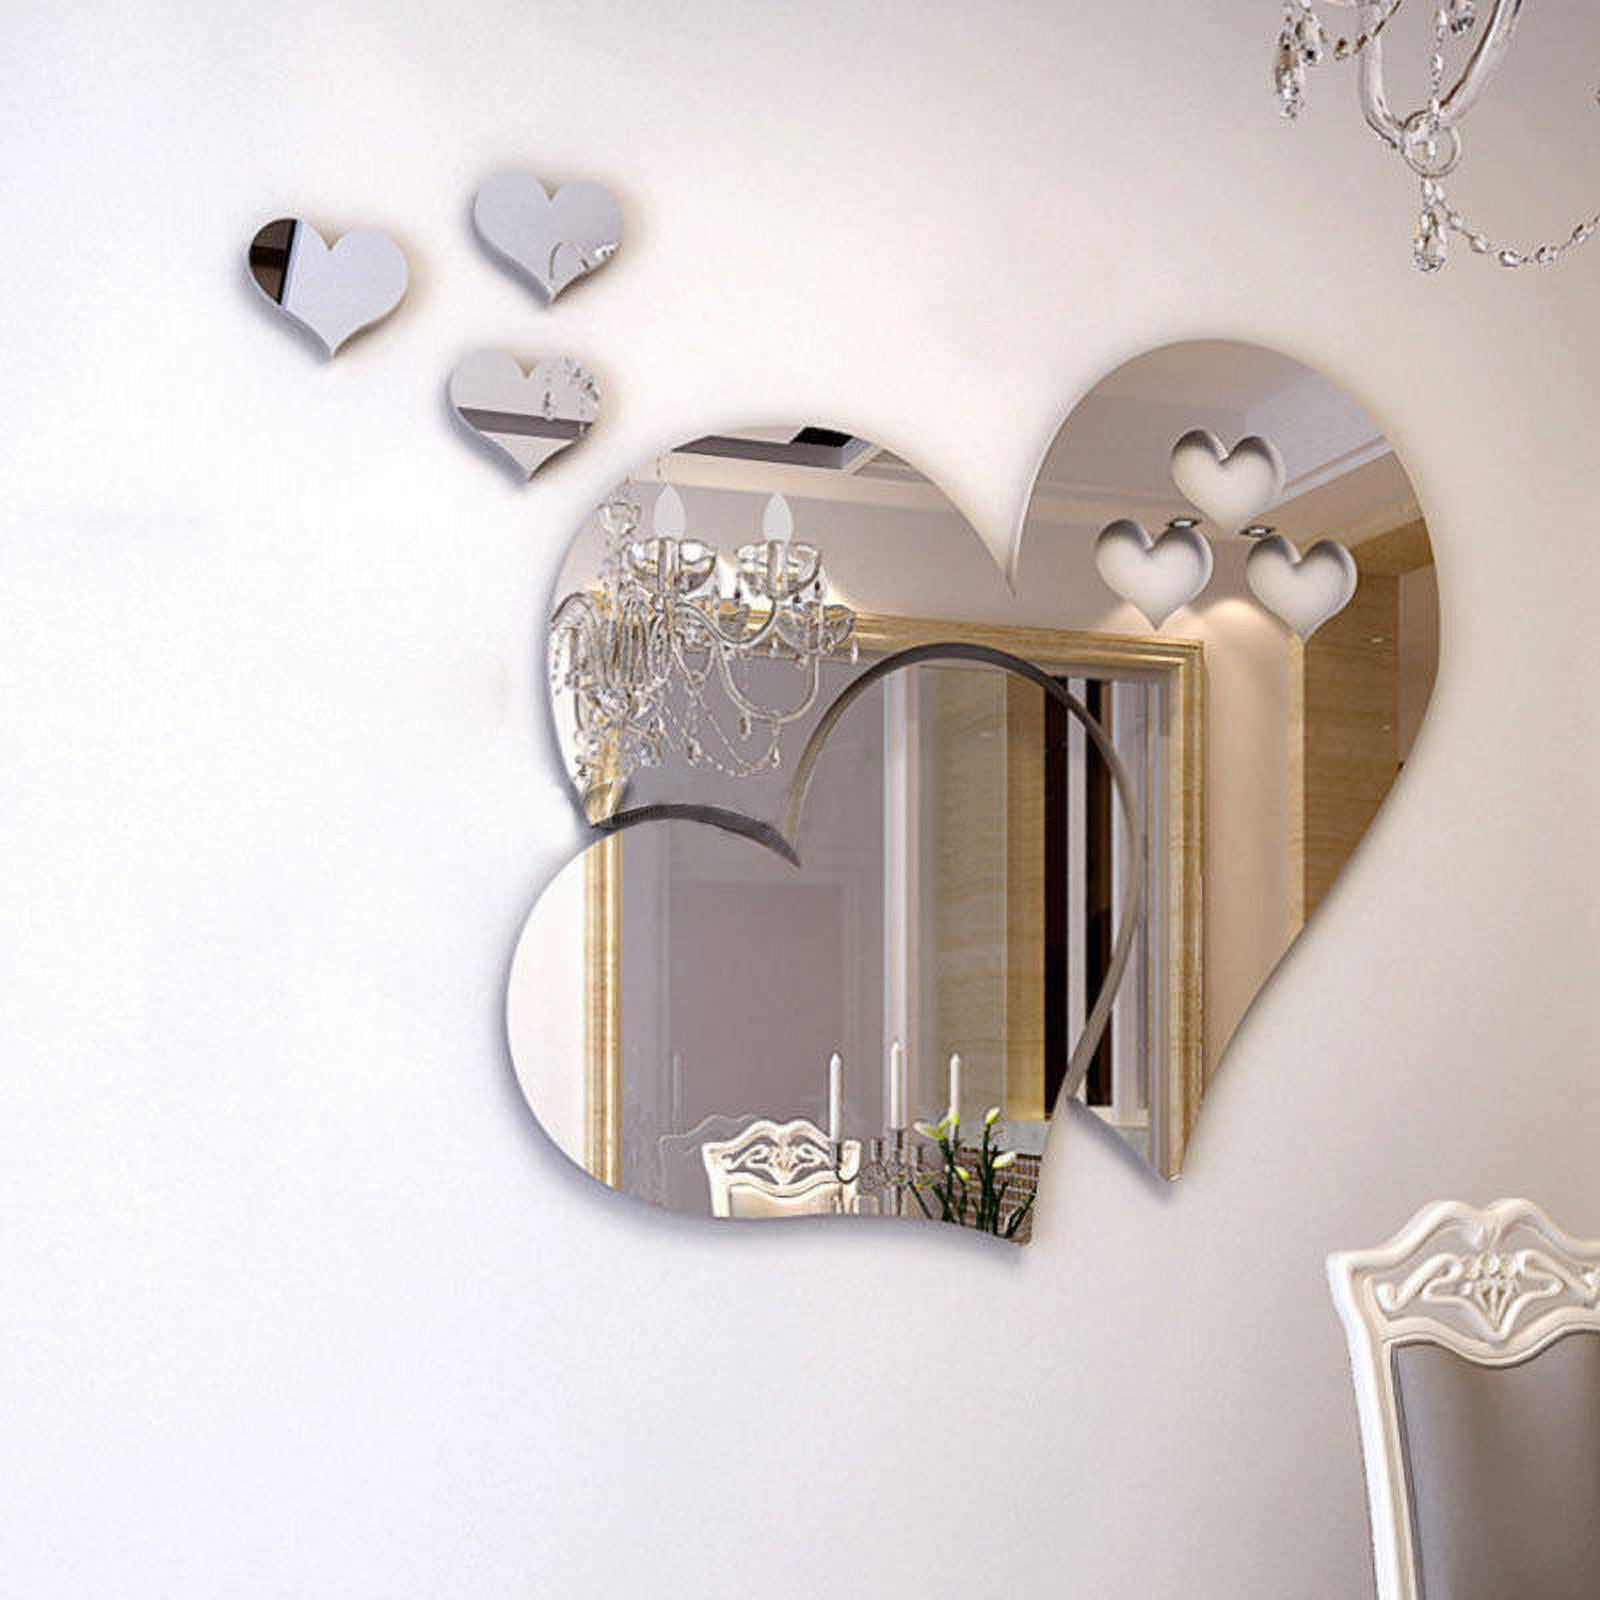 KIMOBER 13PCS Heart Shape Mirror Wall Stickers, Valentine's Day Silver  Acrylic Removable Self-Adhesive Mirror Decals for Home Decorations